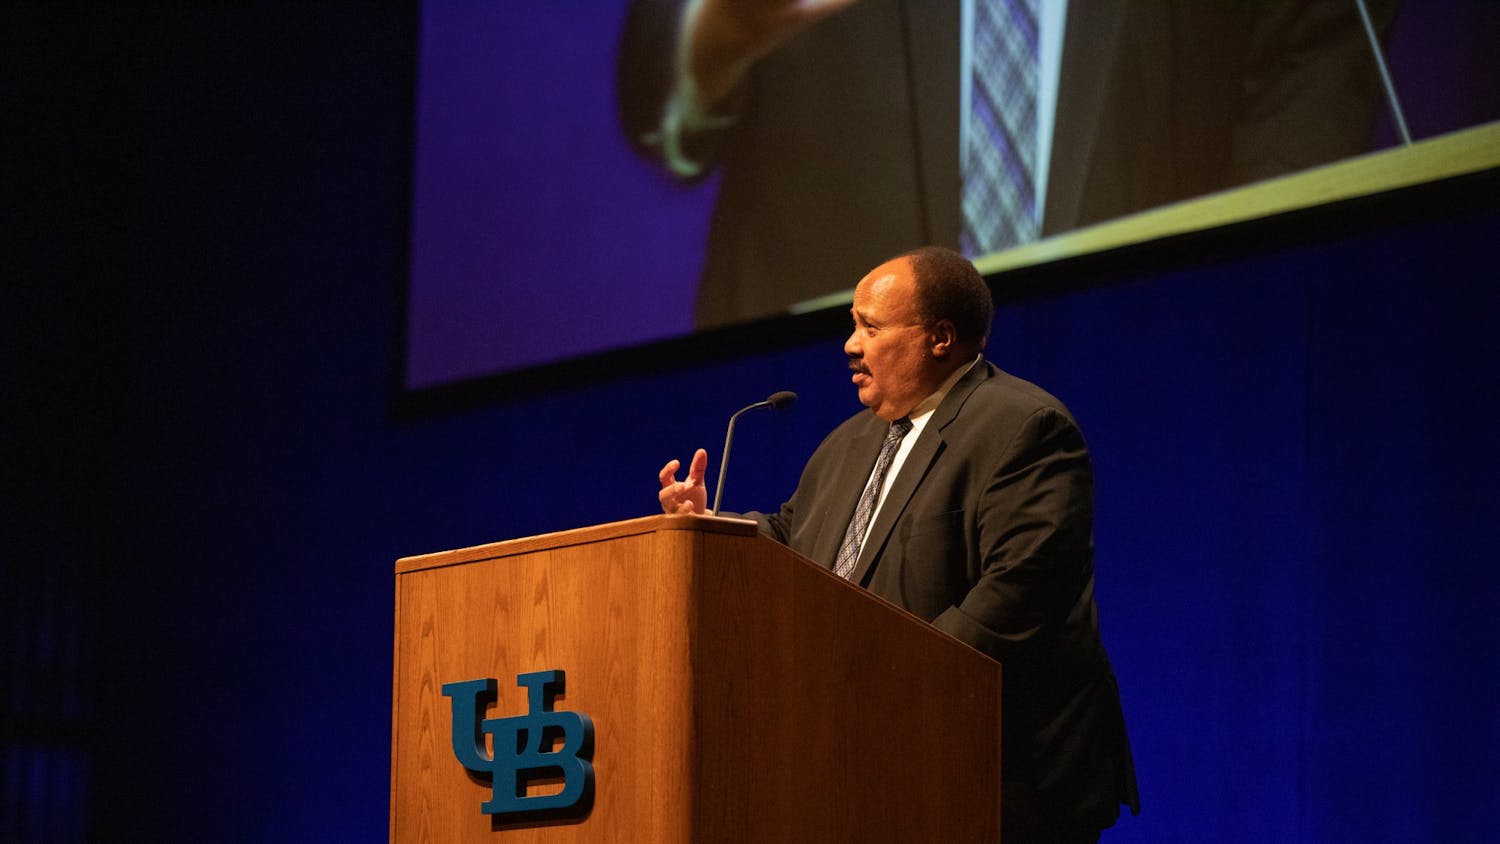 Martin Luther King III, the eldest son of Martin Luther King Jr., spoke at the Center for the Arts Tuesday evening.